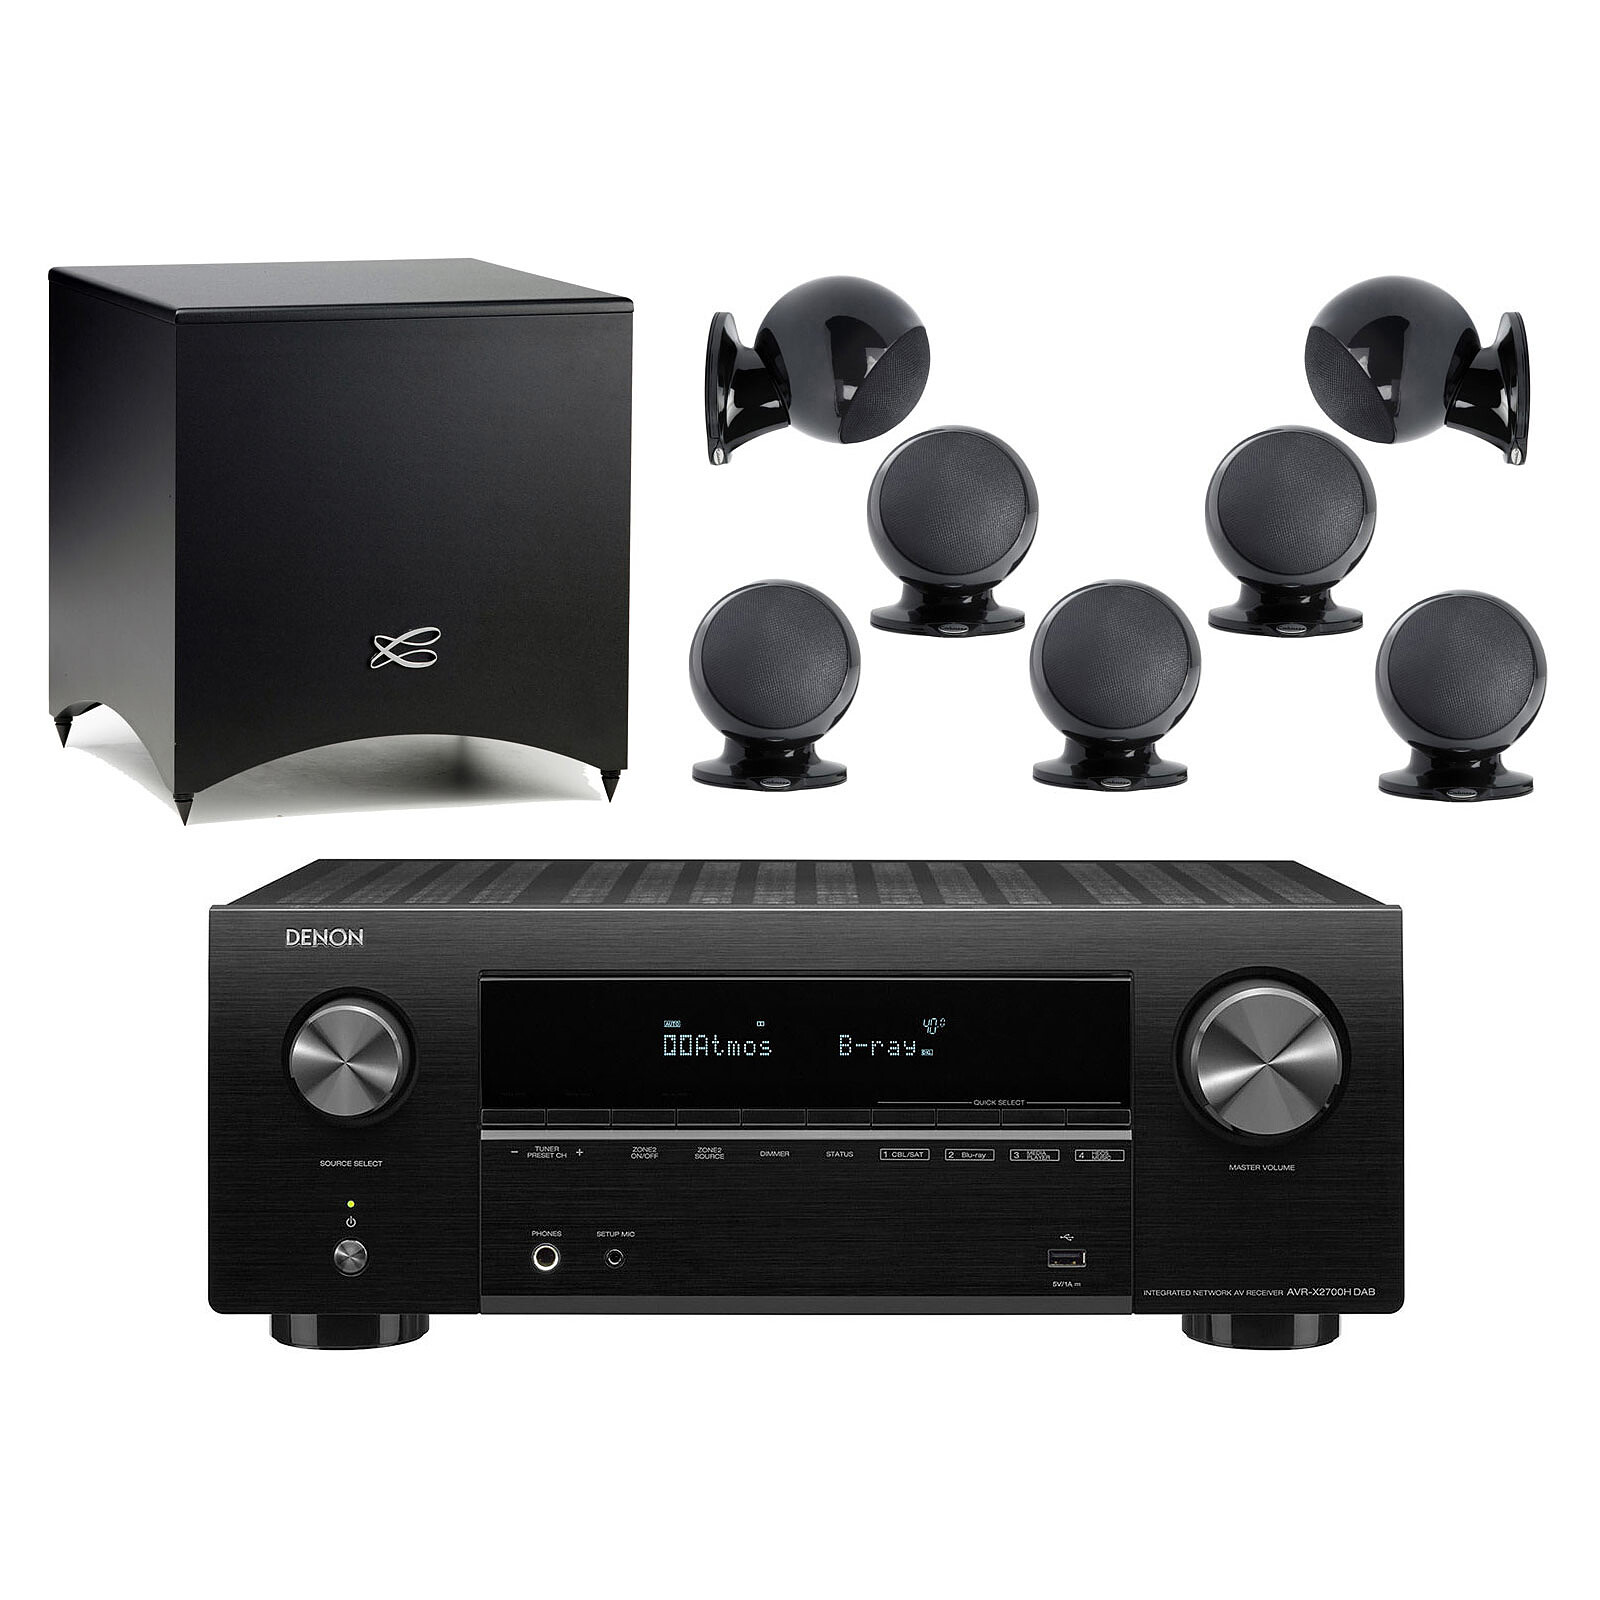 Denon AVR-X2700H DAB Black Cabasse Alcyone 2 Pack 7.1 Black Gloss - Home theater system Denon LDLC | Holy Moley